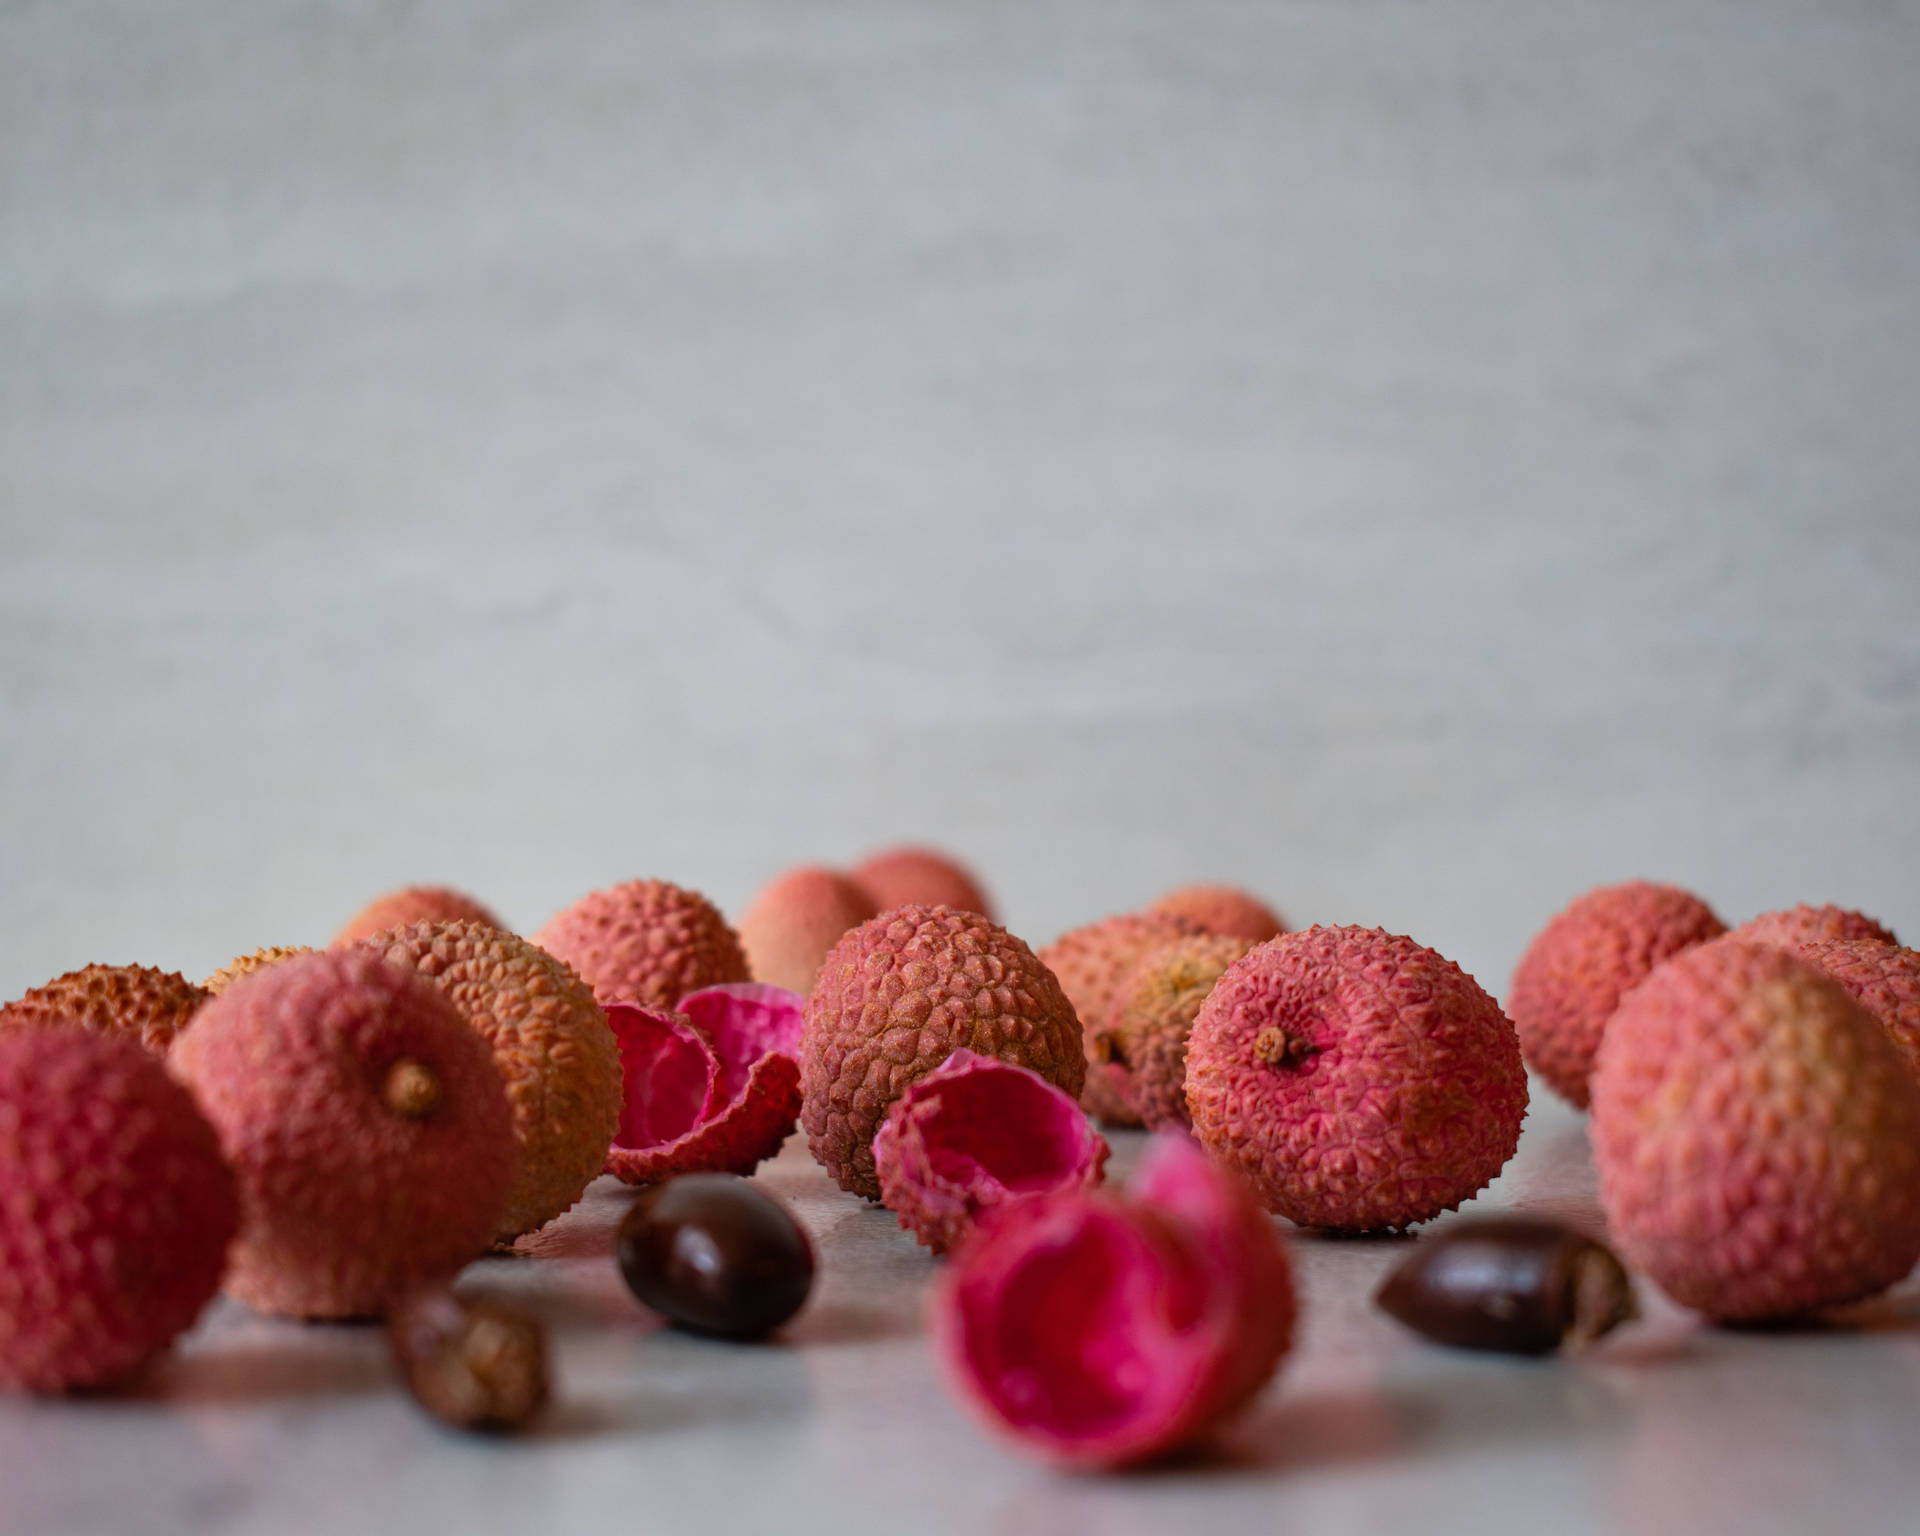 Aesthetic Litchi Fruits And Seeds Background